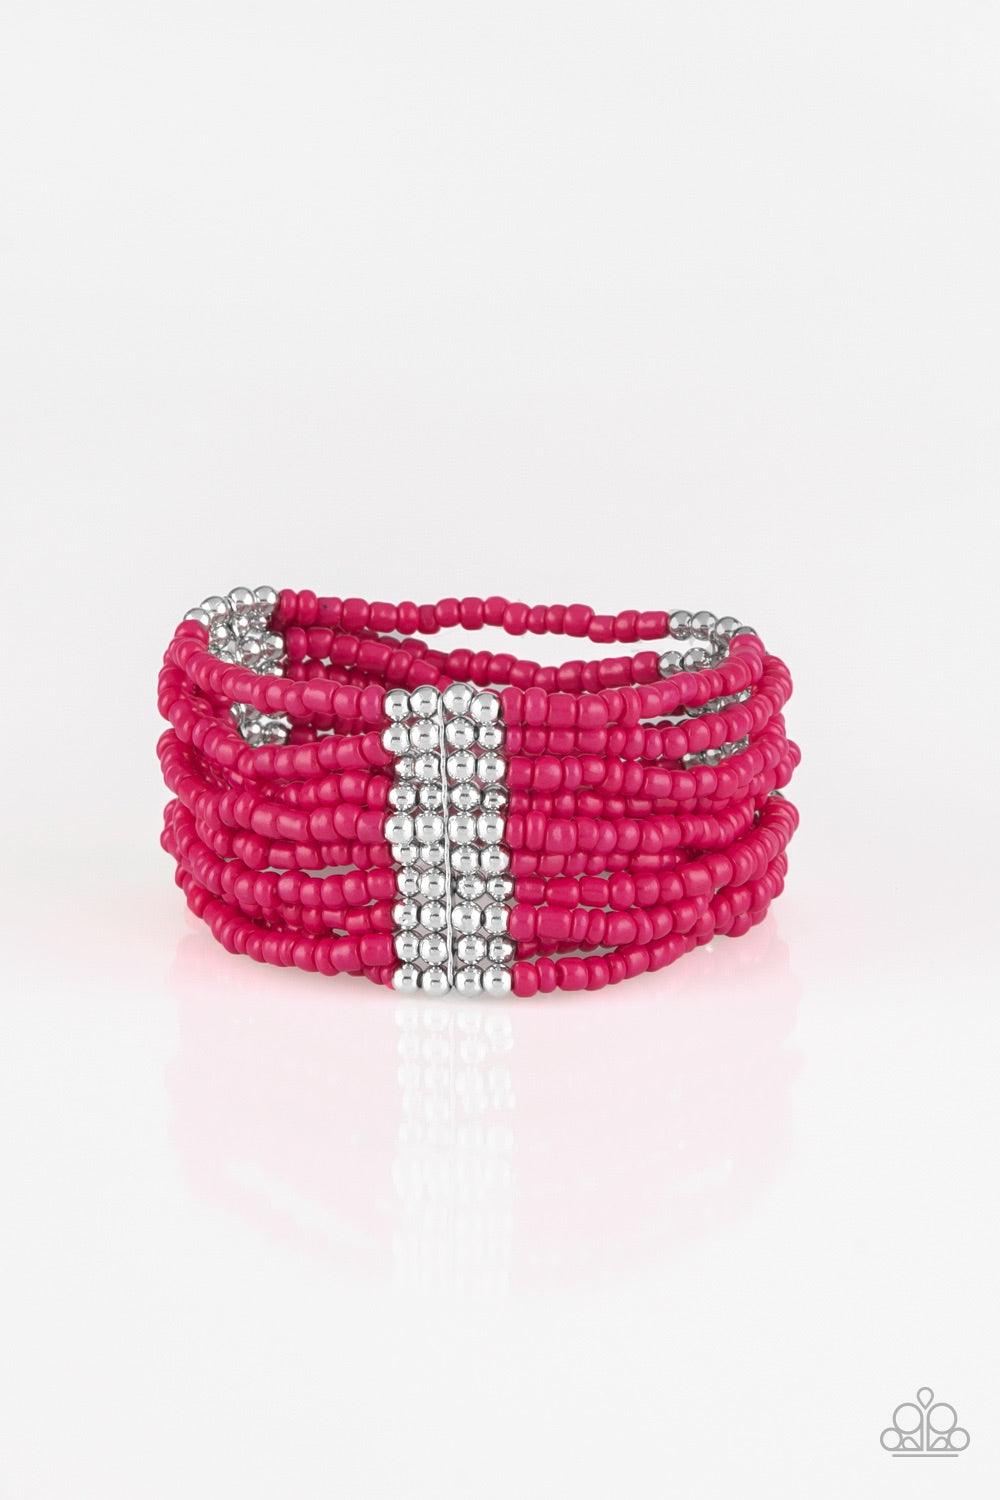 Paparazzi Accessories Outback Odyssey - Pink Joined together with metallic fittings, countless pink seed beads are threaded along stretchy elastic bands. Sections of dainty silver beads are sprinkled along the colorful layers, adding hints of shimmer to t